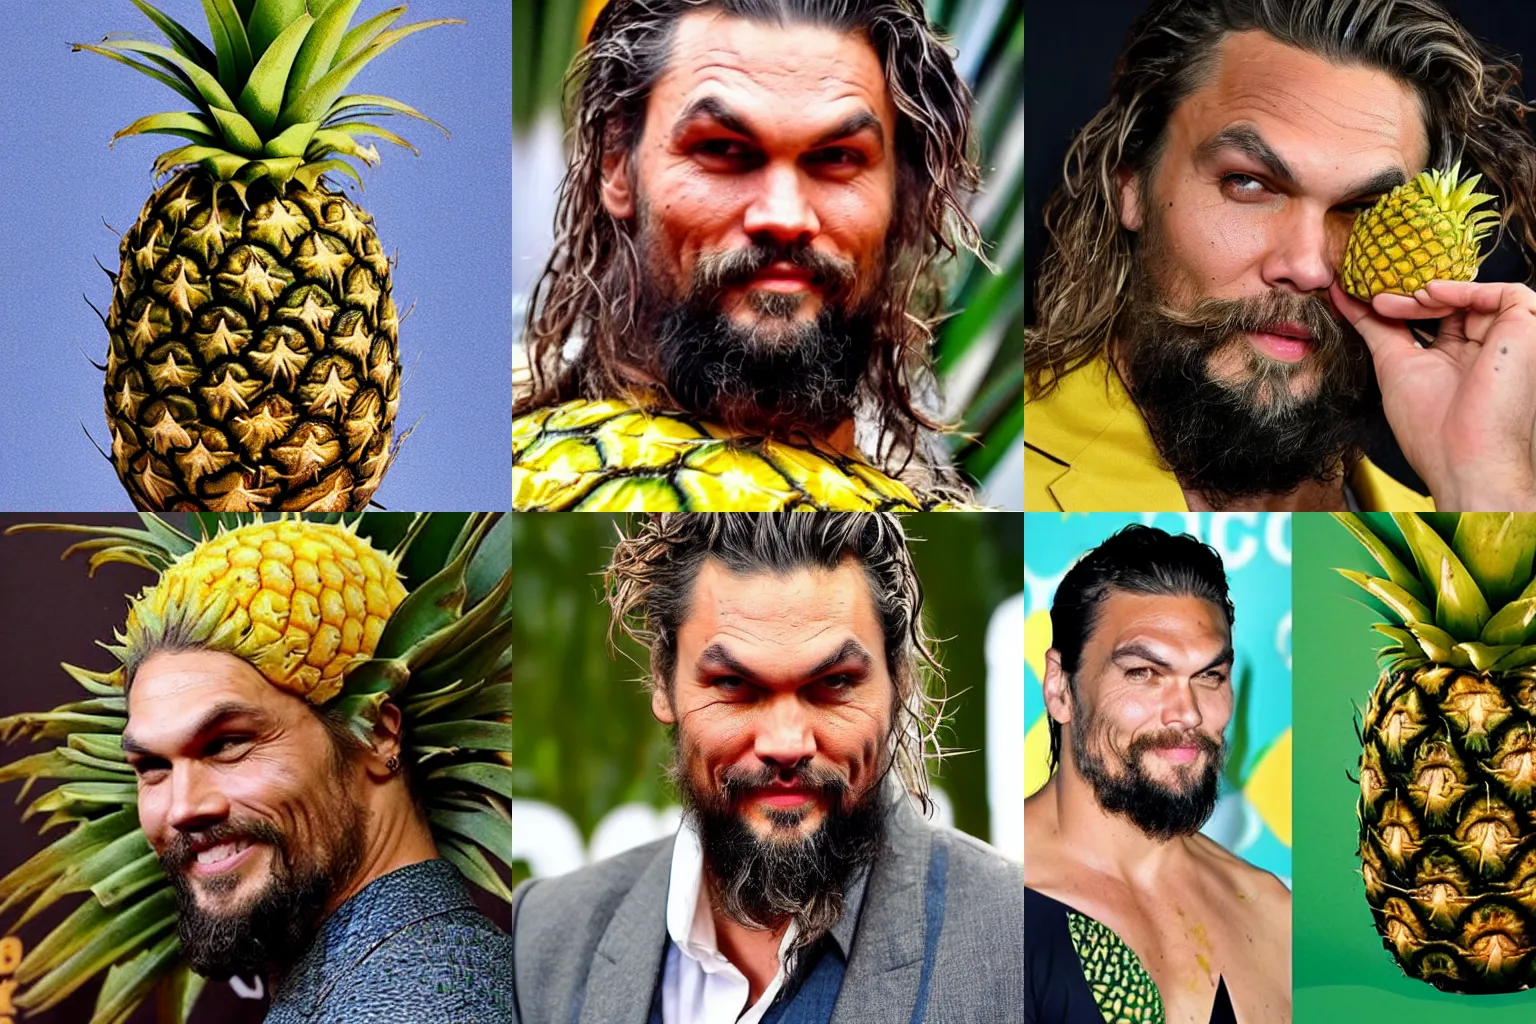 Prompt: jereme momoa's face poking out of the top of a pineapple.